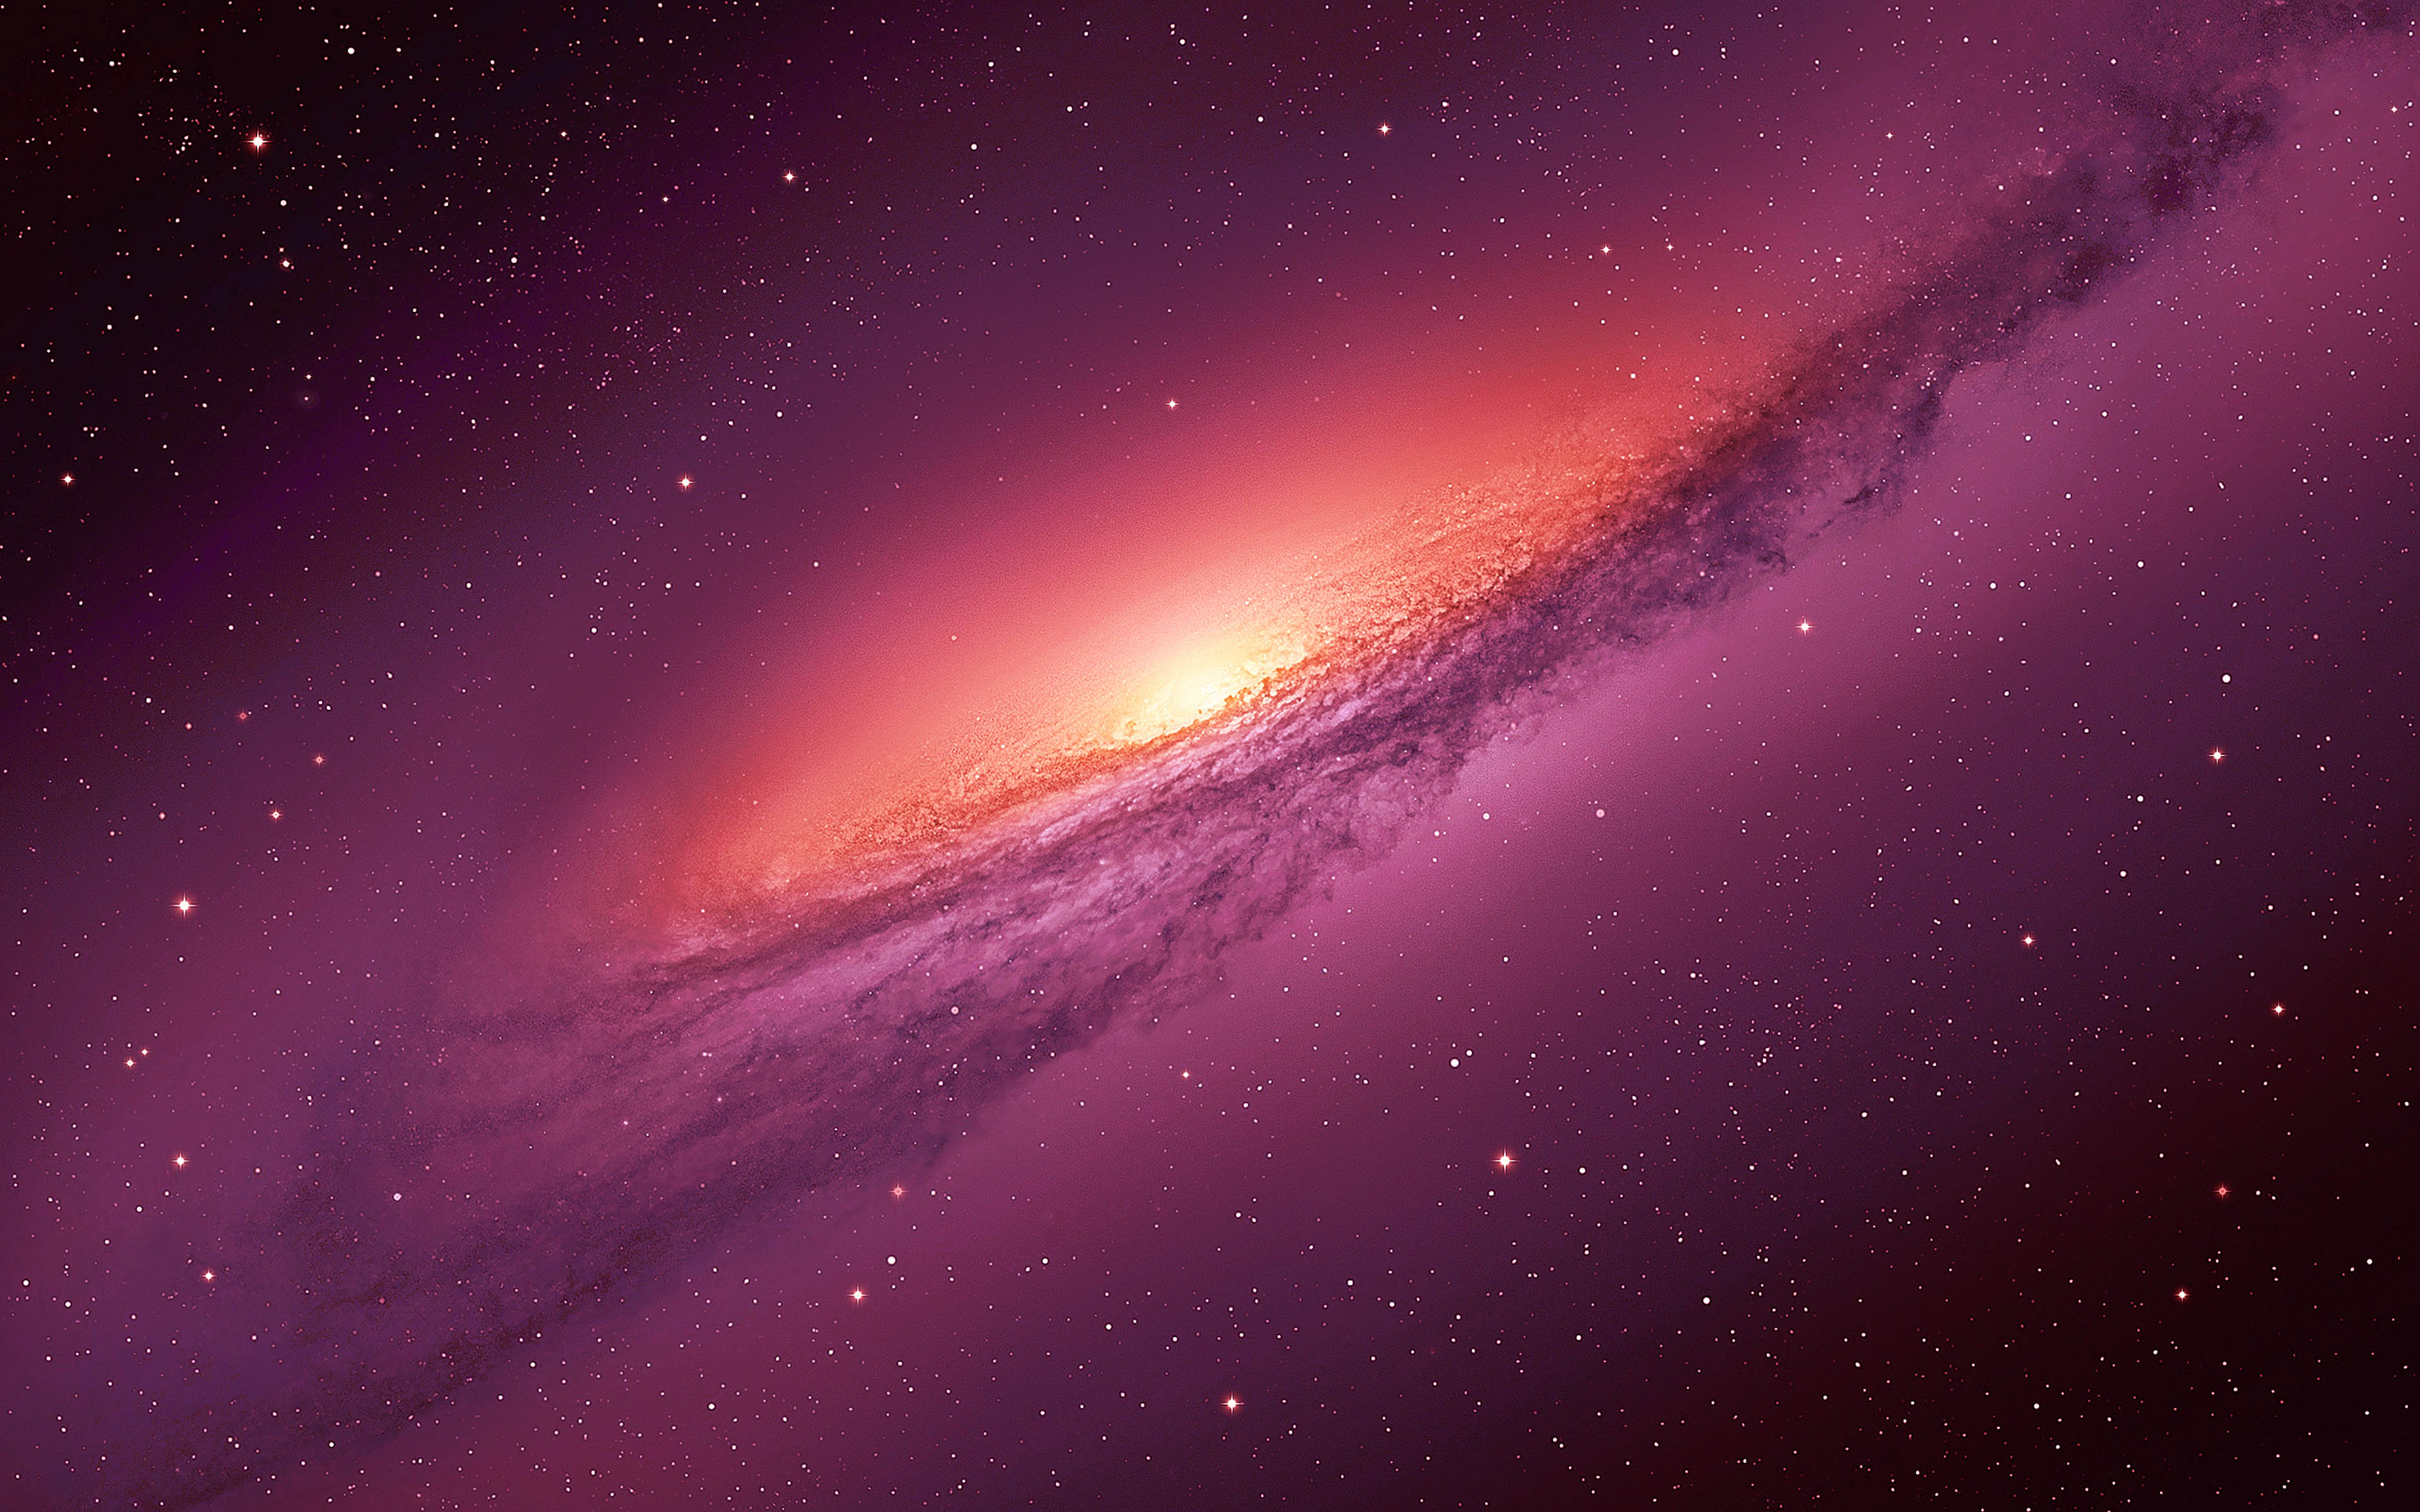 Purple Galaxy Space Wallpaper Hd For Desktop Mobile Phones Laptops And